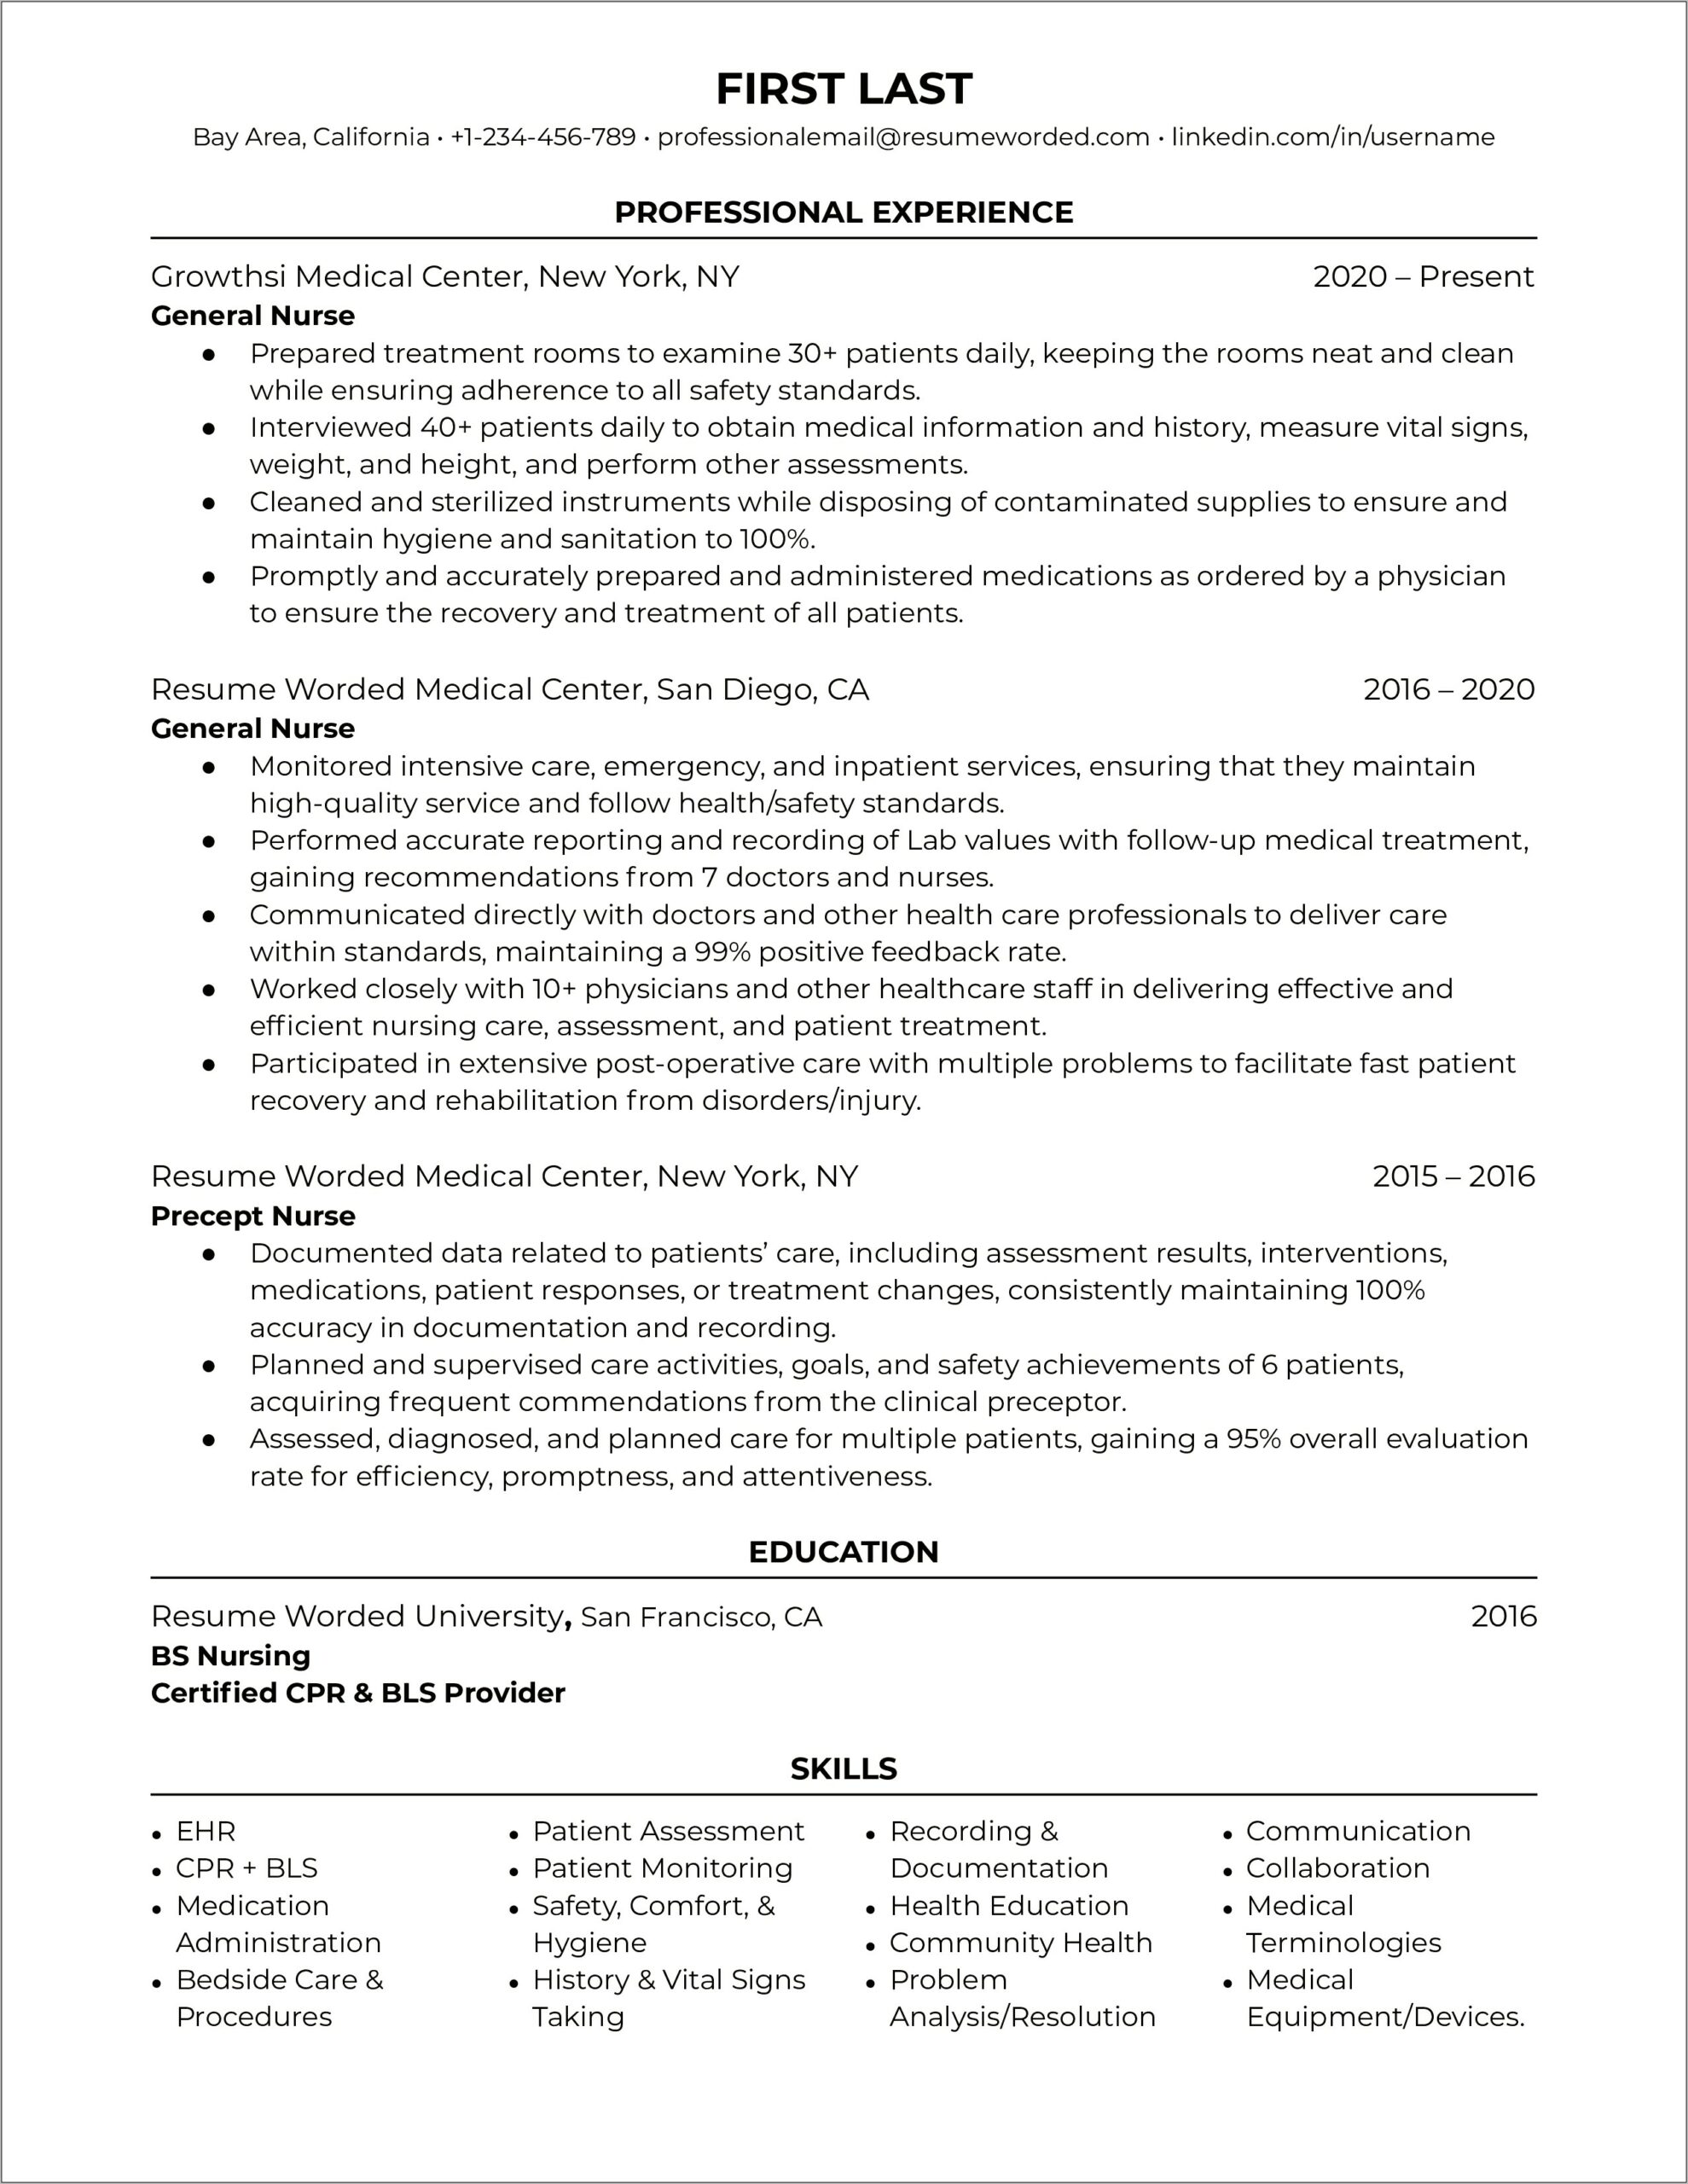 Professional Resume Example For Medical Field